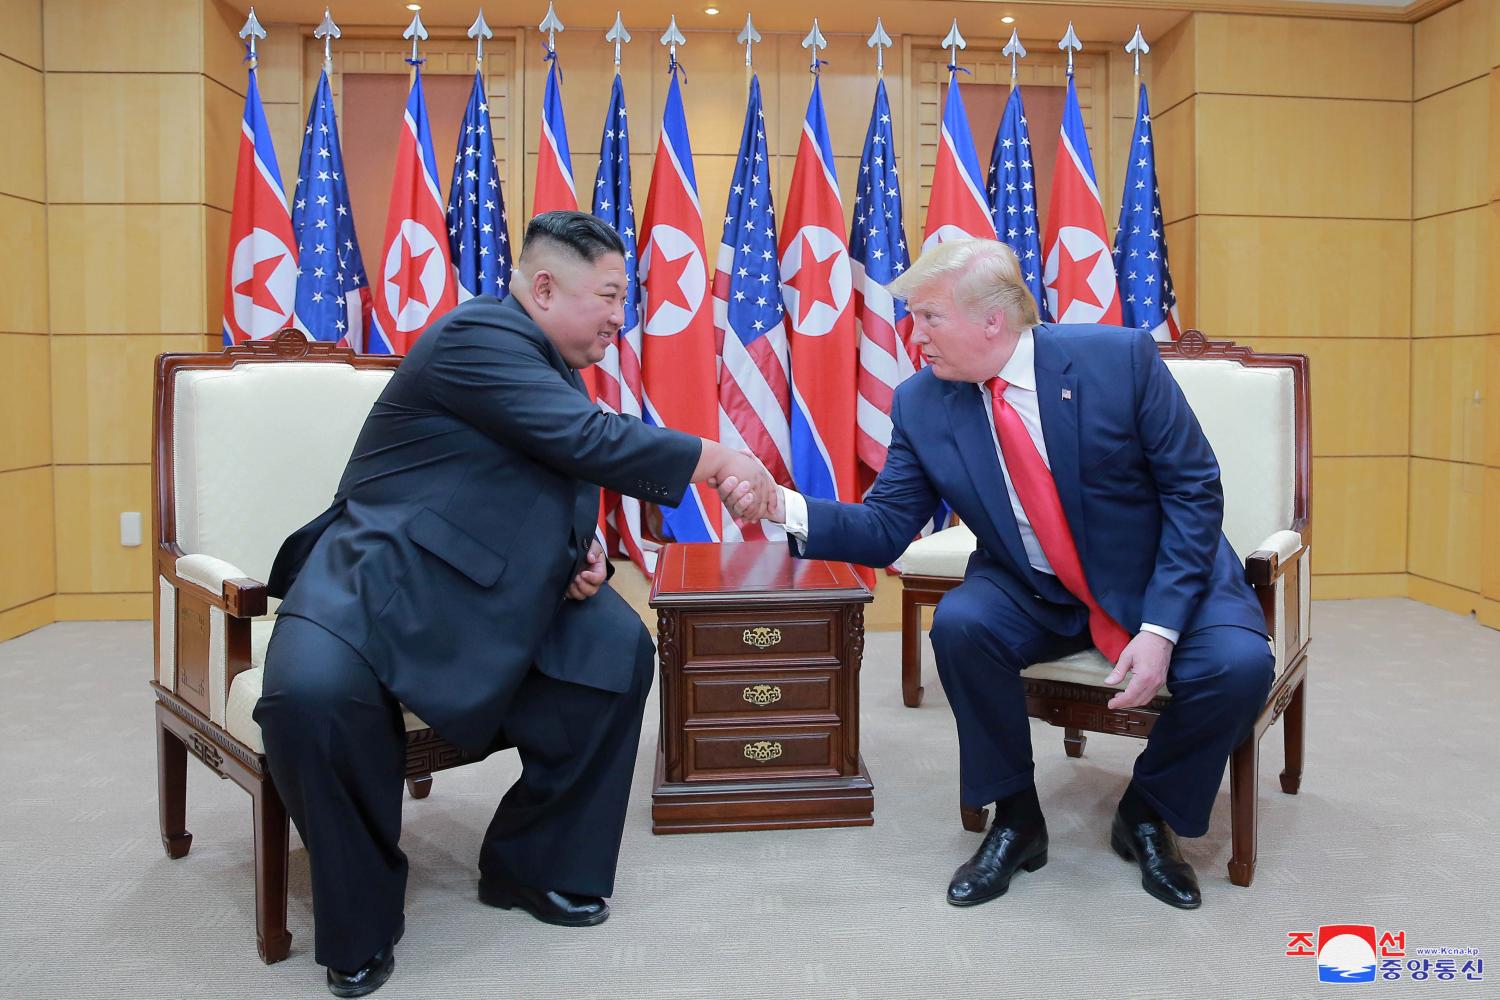 U.S. President Donald Trump and North Korean leader Kim Jong Un shake hands during a meeting at the demilitarized zone (DMZ) separating the two Koreas, in Panmunjom, South Korea, June 30, 2019. KCNA via REUTERS    ATTENTION EDITORS - THIS IMAGE WAS PROVIDED BY A THIRD PARTY. REUTERS IS UNABLE TO INDEPENDENTLY VERIFY THIS IMAGE. NO THIRD PARTY SALES. SOUTH KOREA OUT. NO COMMERCIAL OR EDITORIAL SALES IN SOUTH KOREA. - RC1484CCD790